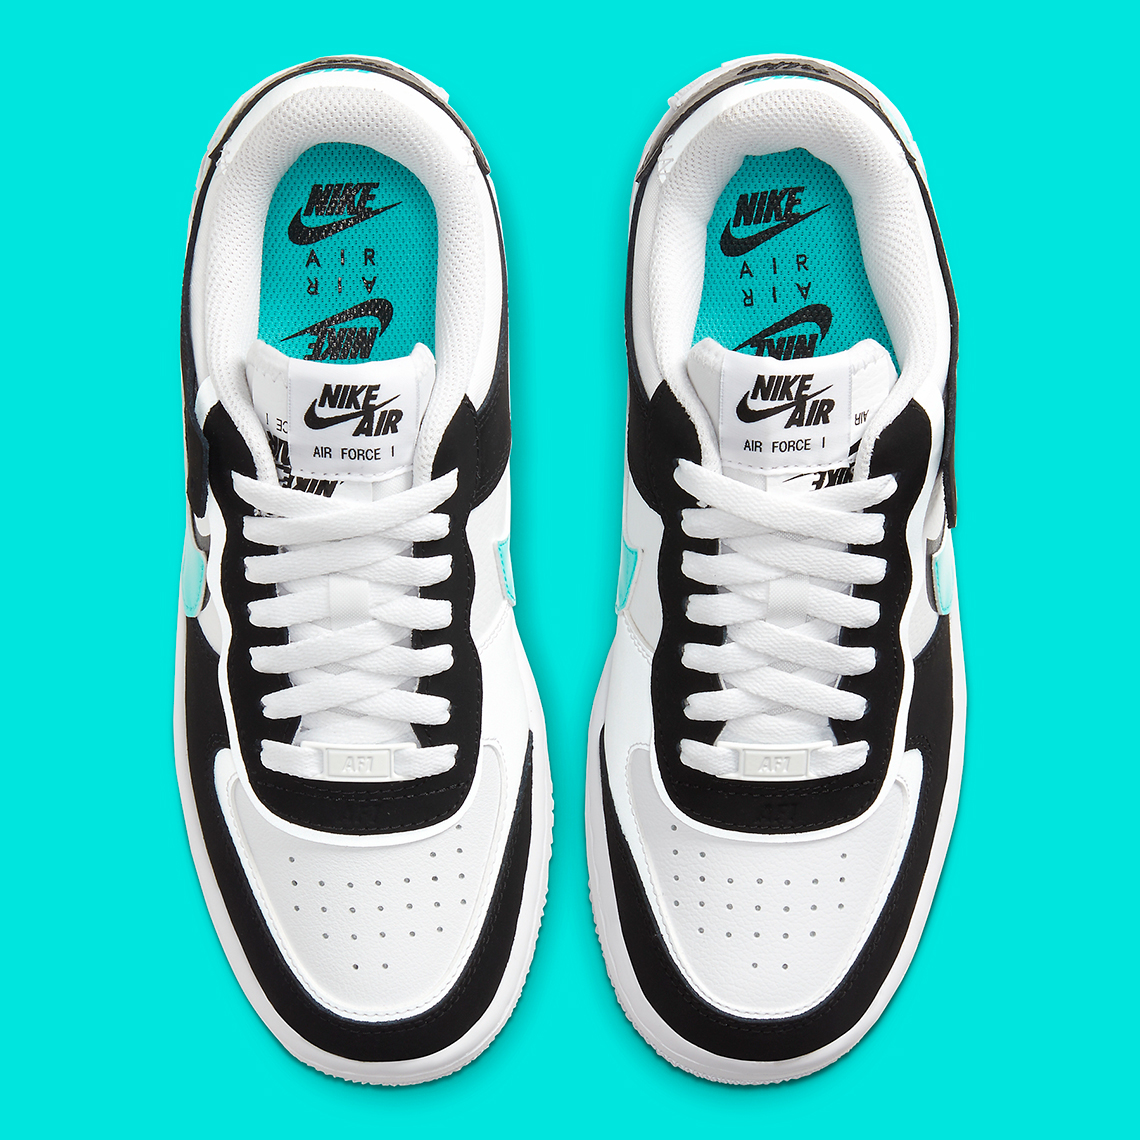 nike air force 1 shadow turquoise